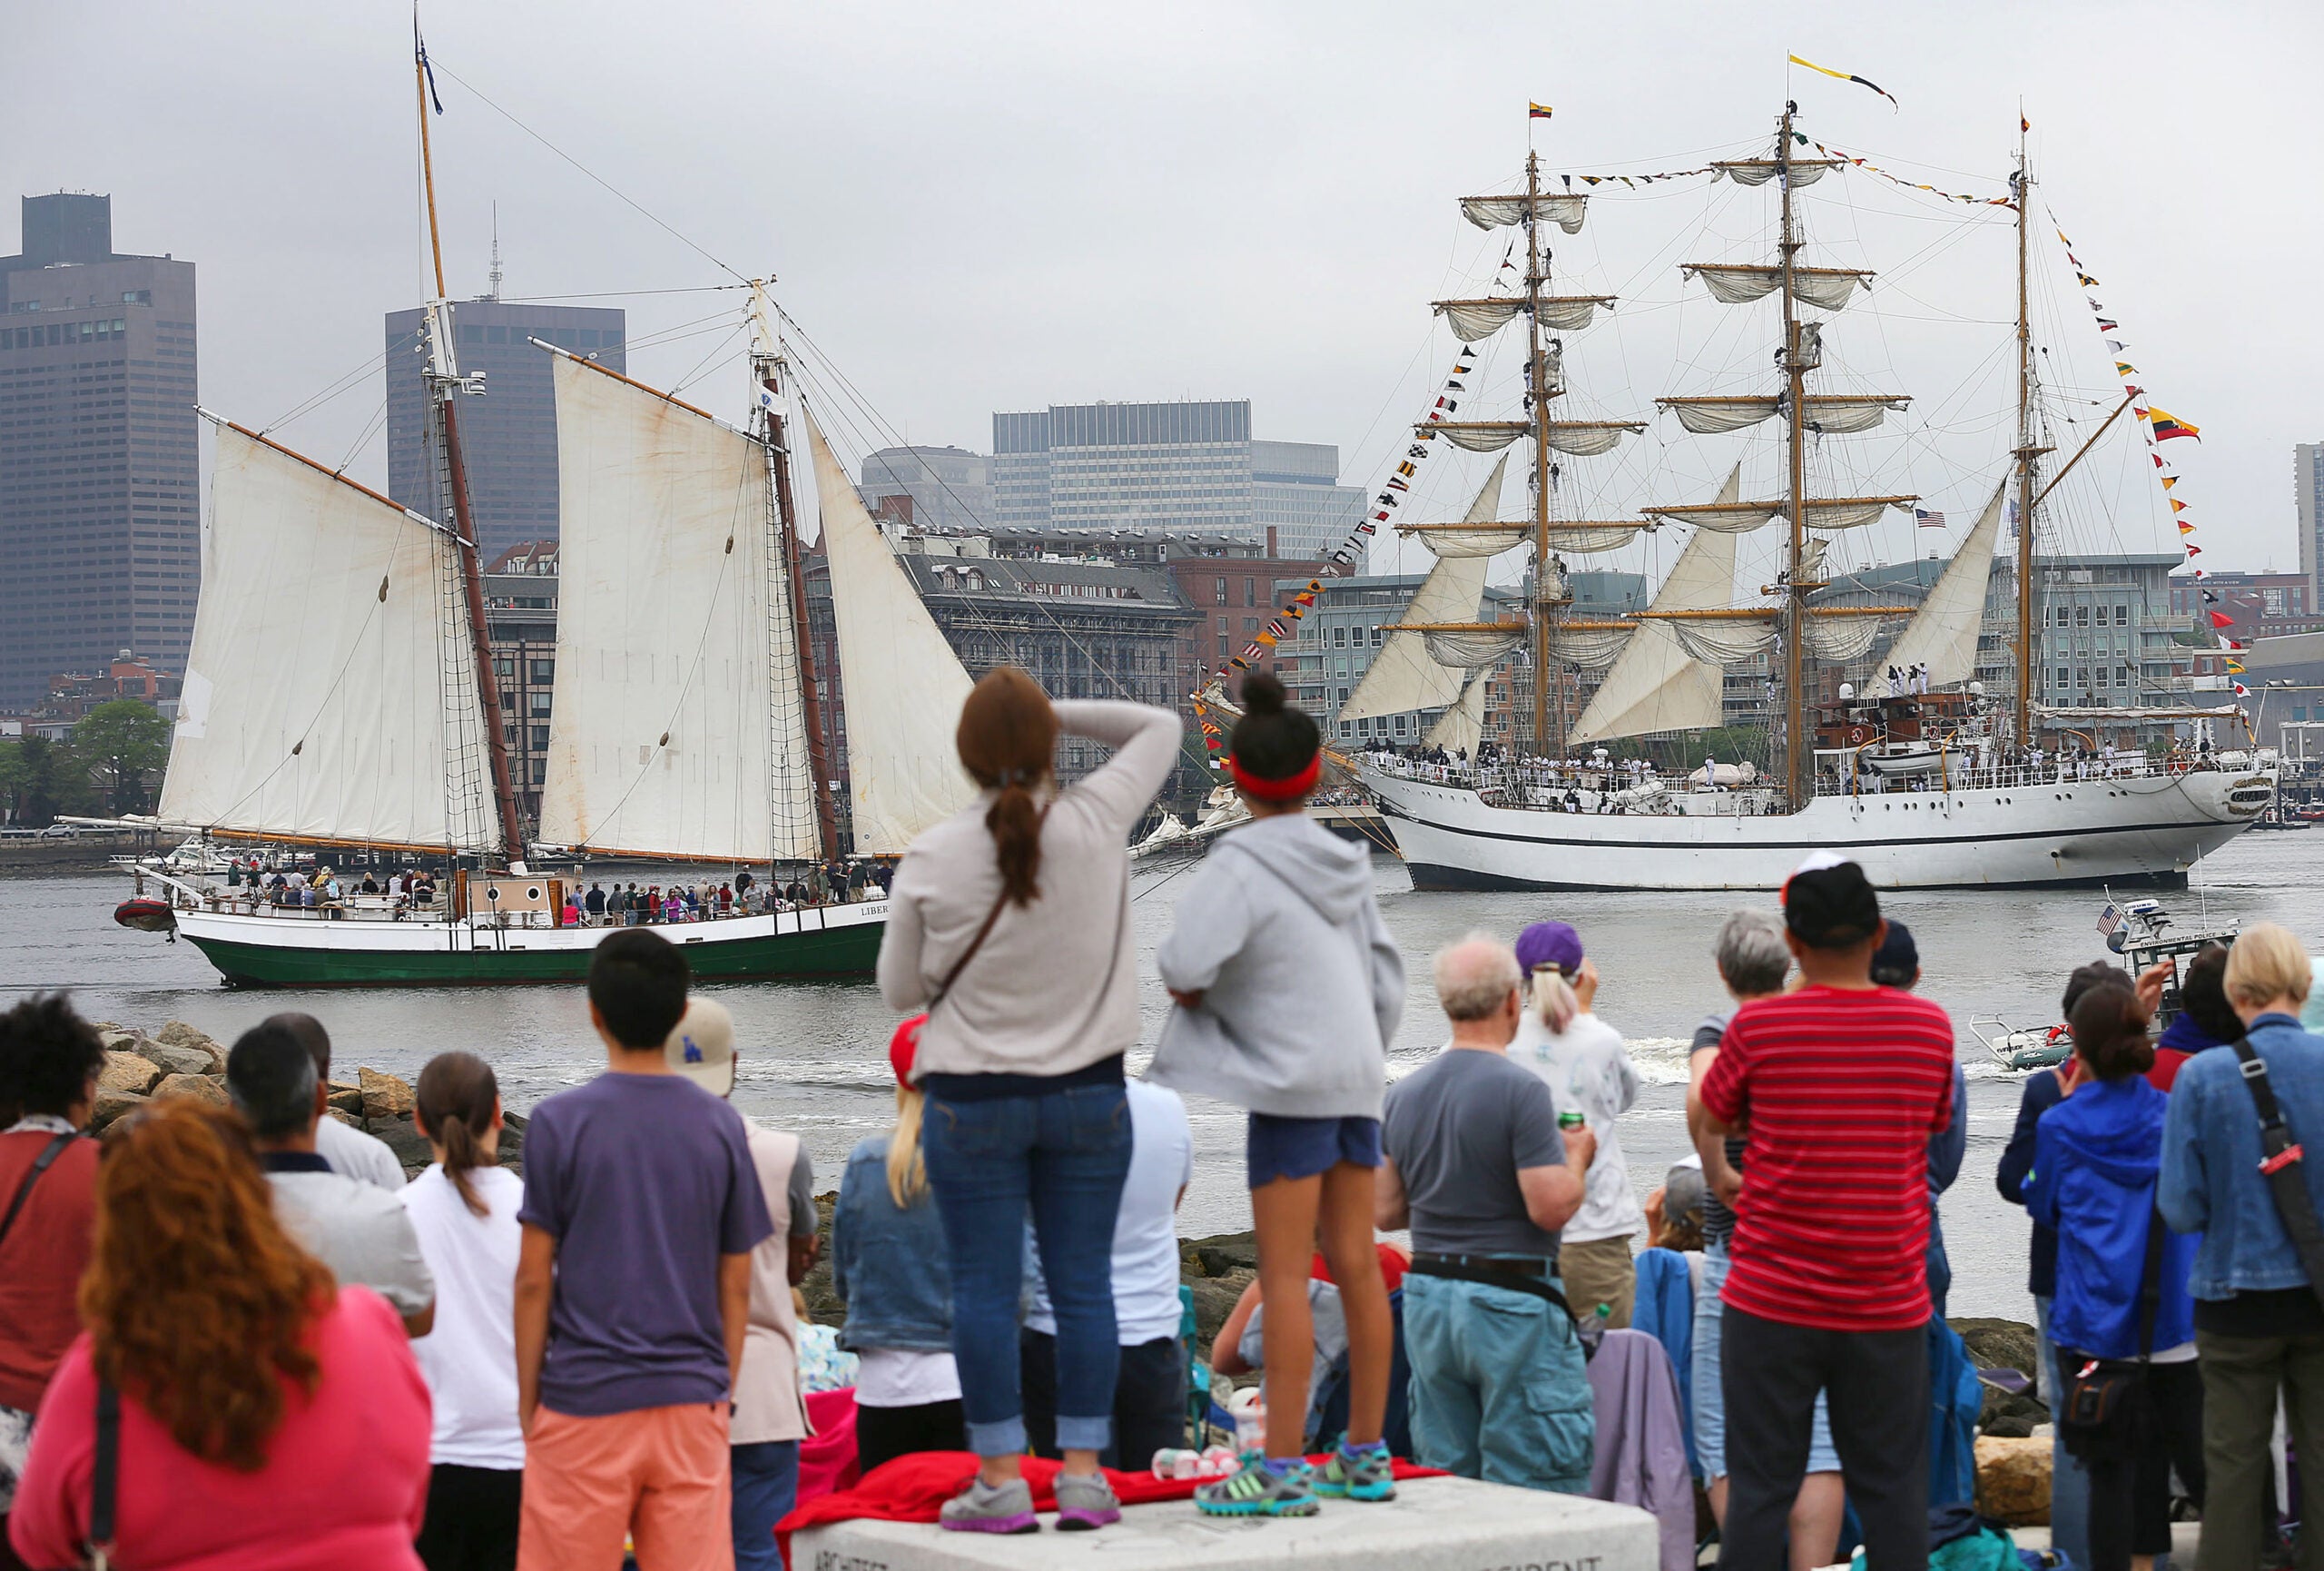 11 majestic photos of the Tall Ships descending upon Boston